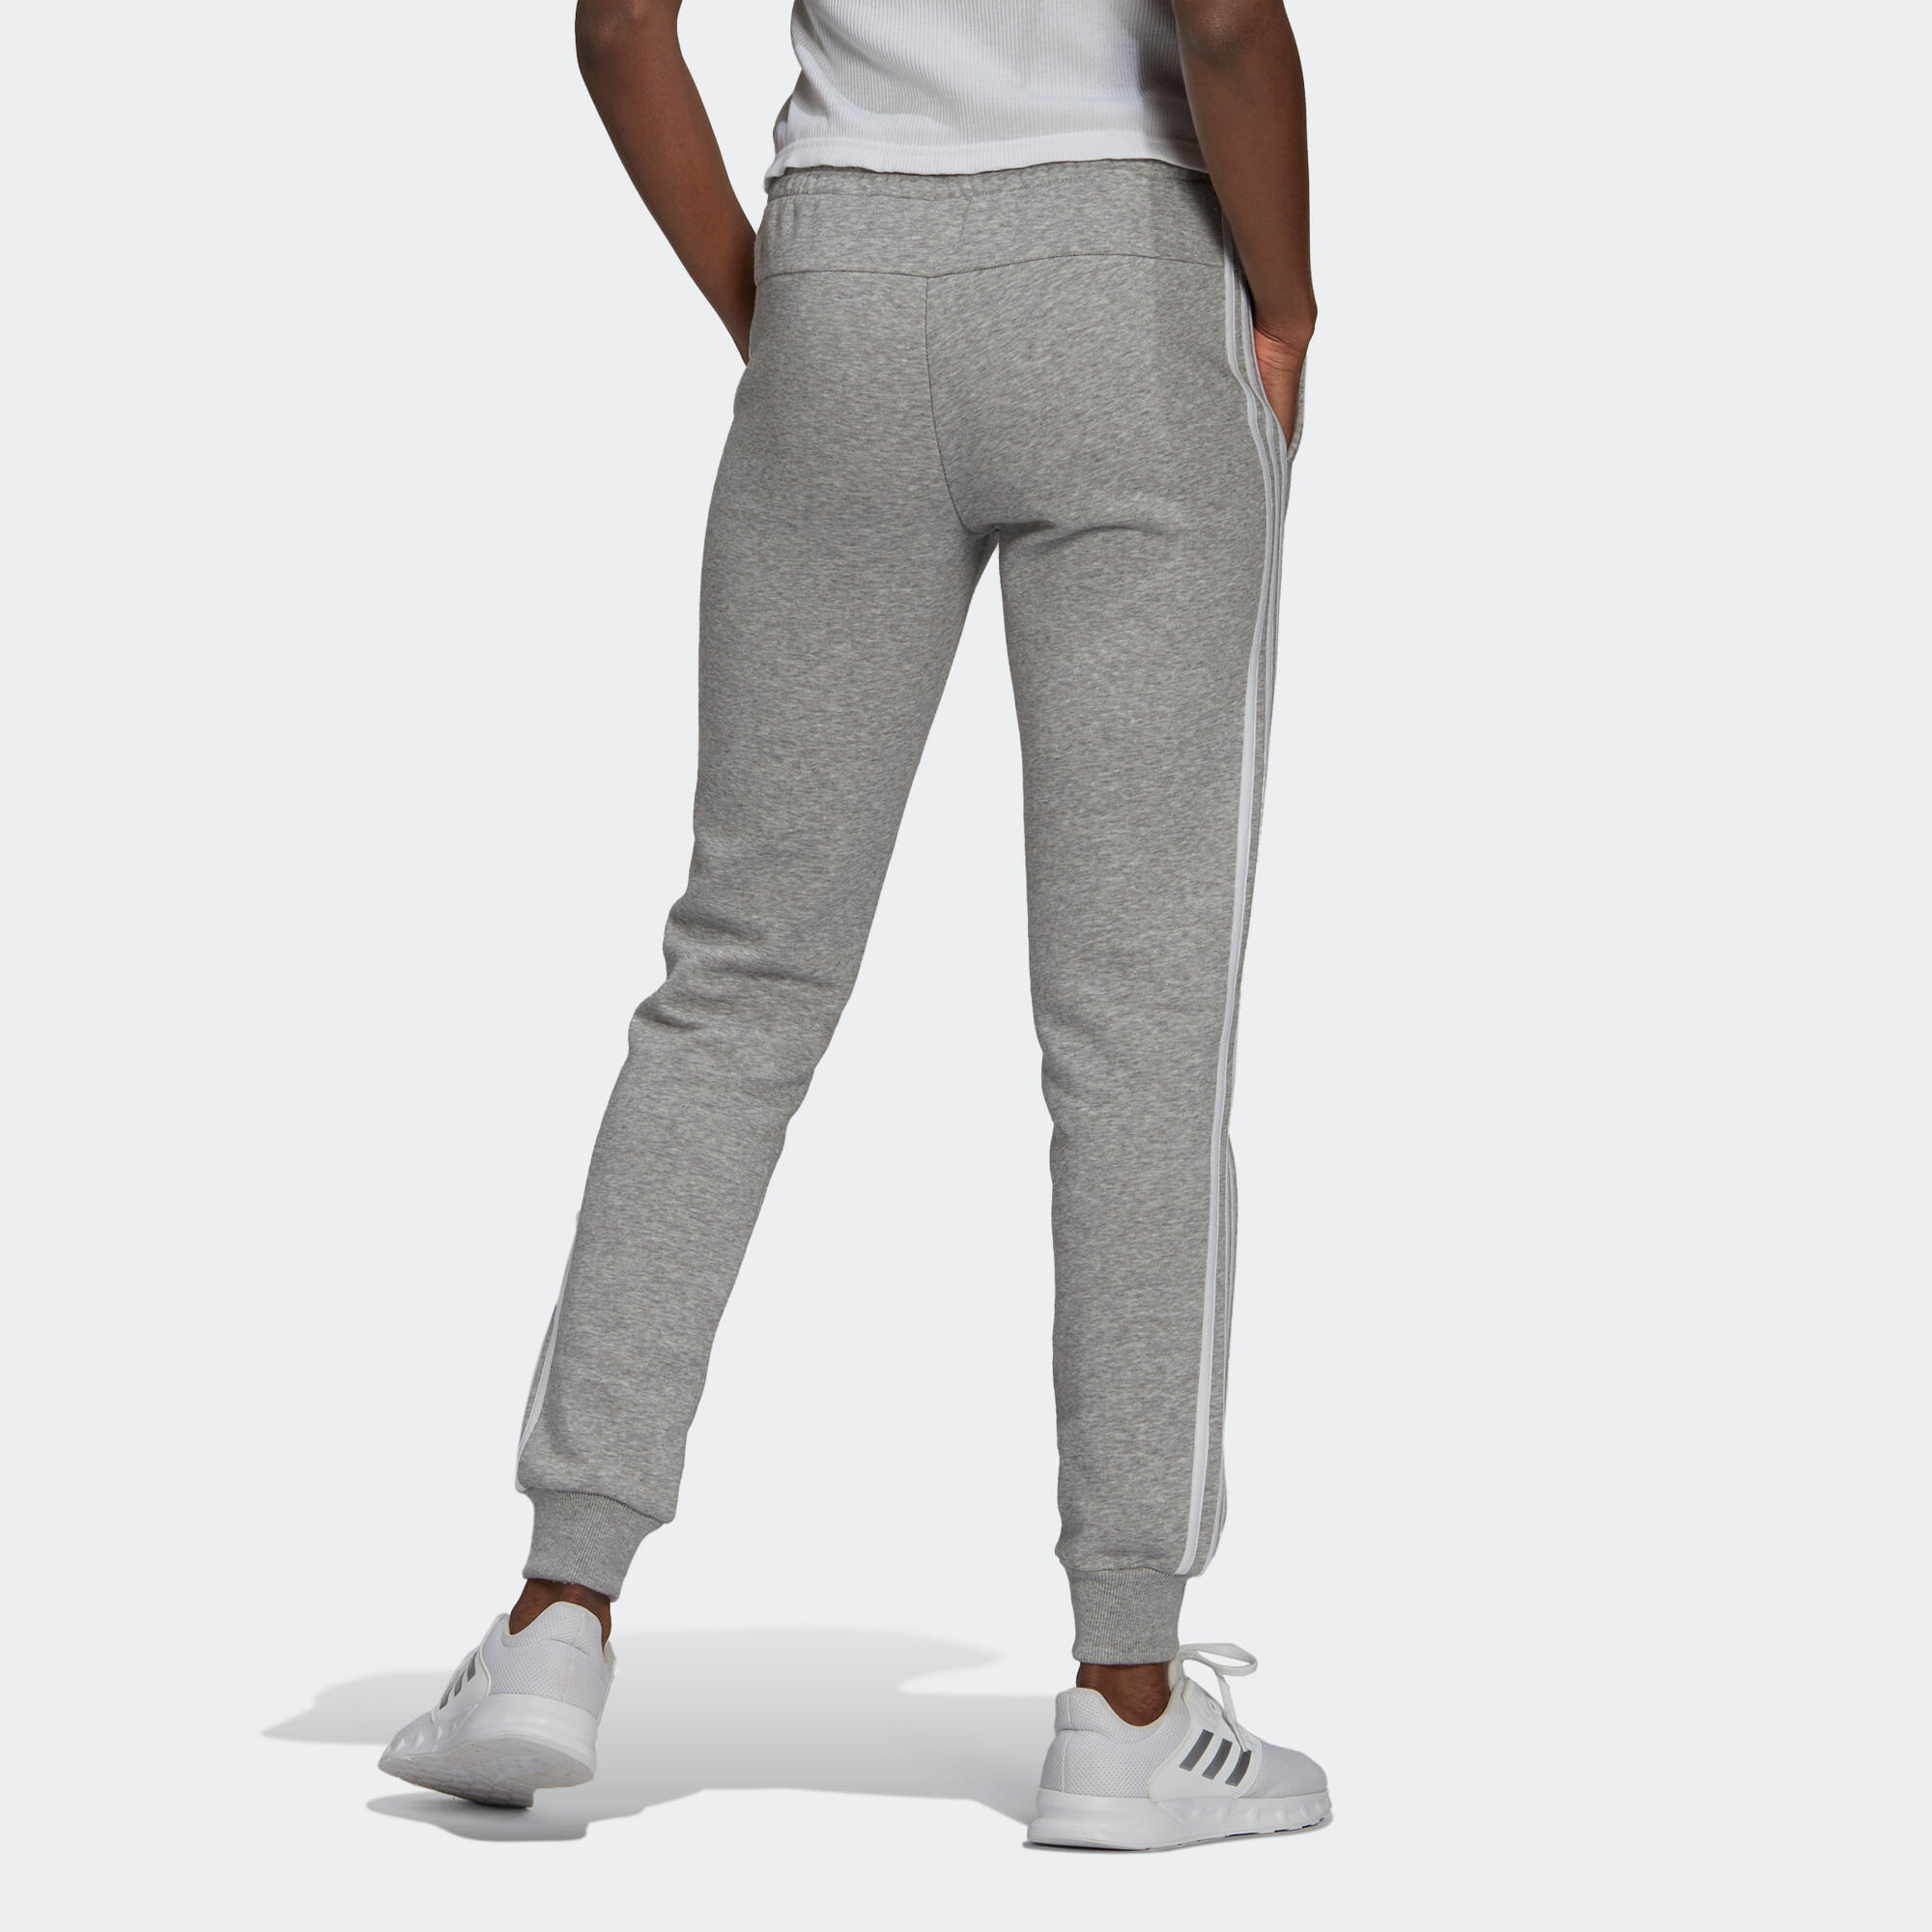 Women's Cotton-Rich Fitted Jogging Fitness Bottoms - Grey 2/6